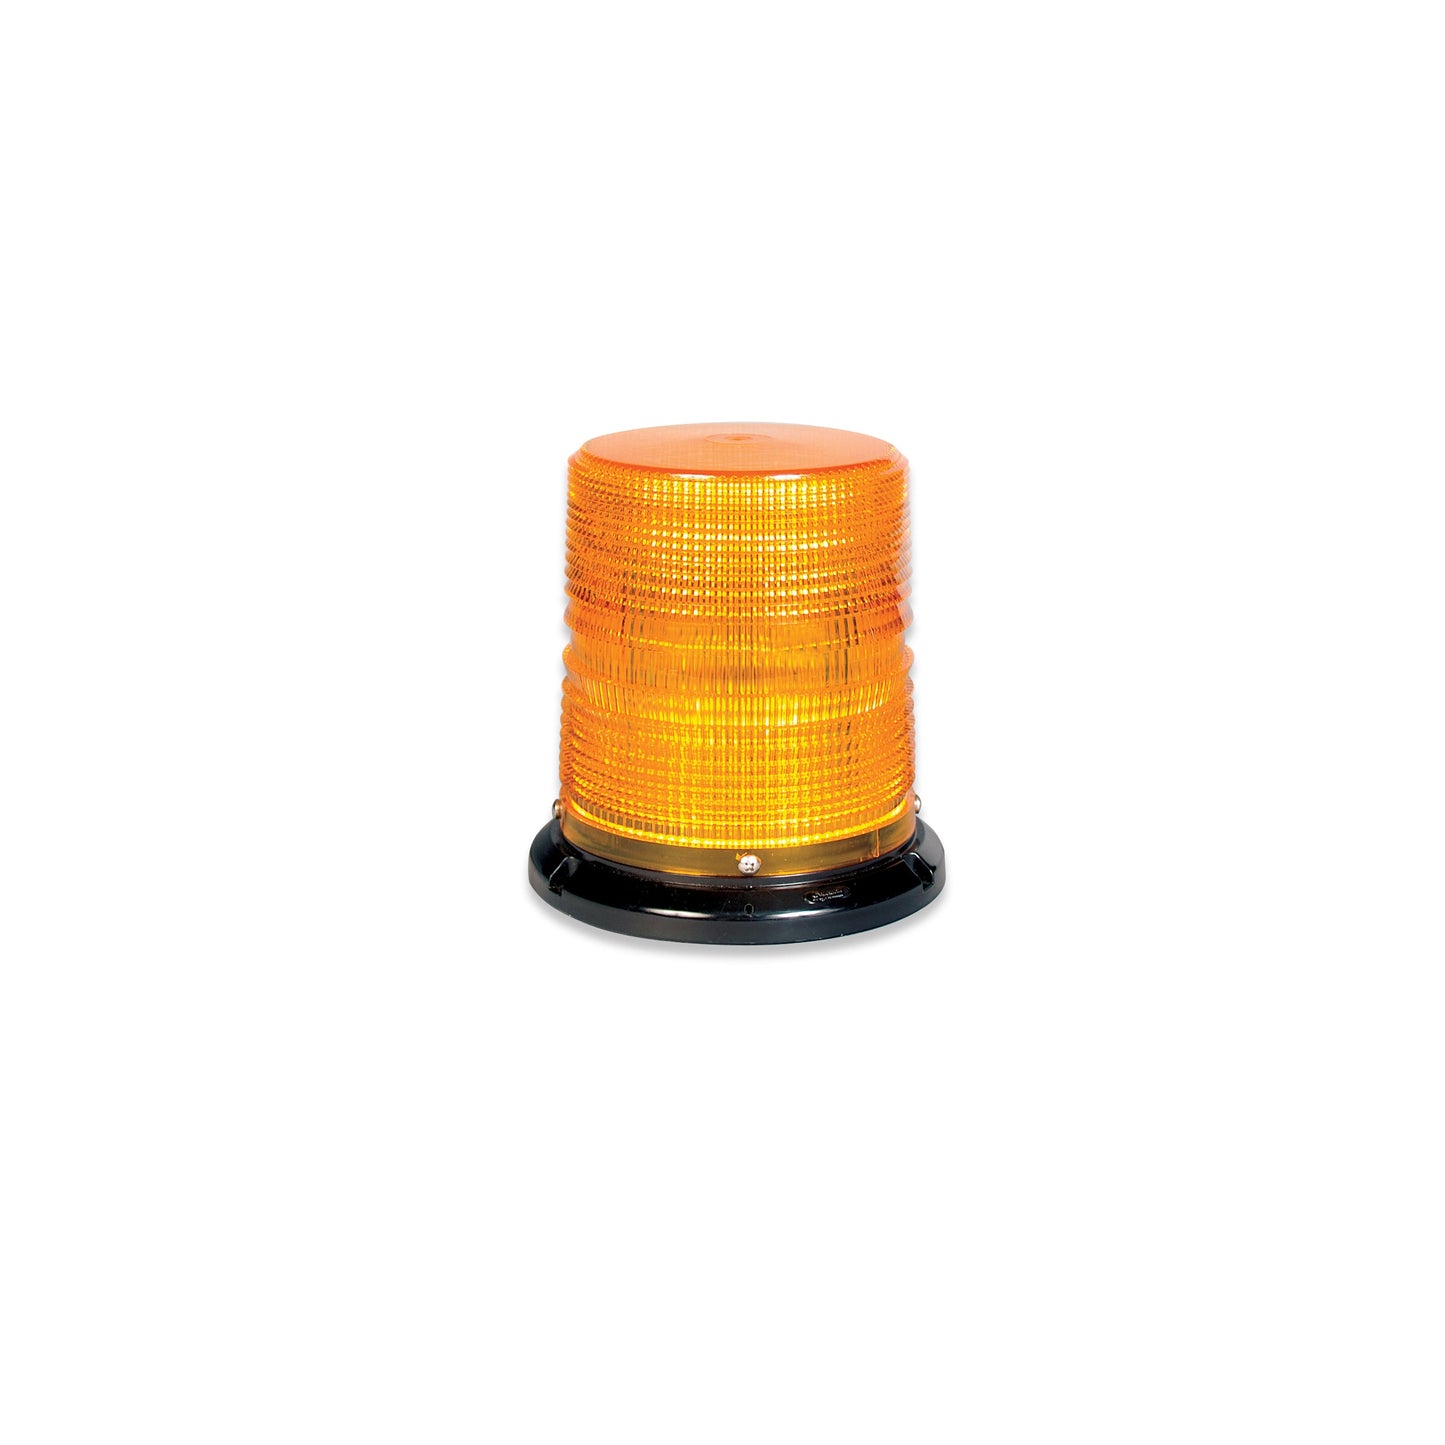 Soundoff Signal ELB45BML+GC 4500 Series Led Beacon, 10-30V, Sae J845 Class 1 - Magnetic Mount, 4" Clear Dome/ Green Leds